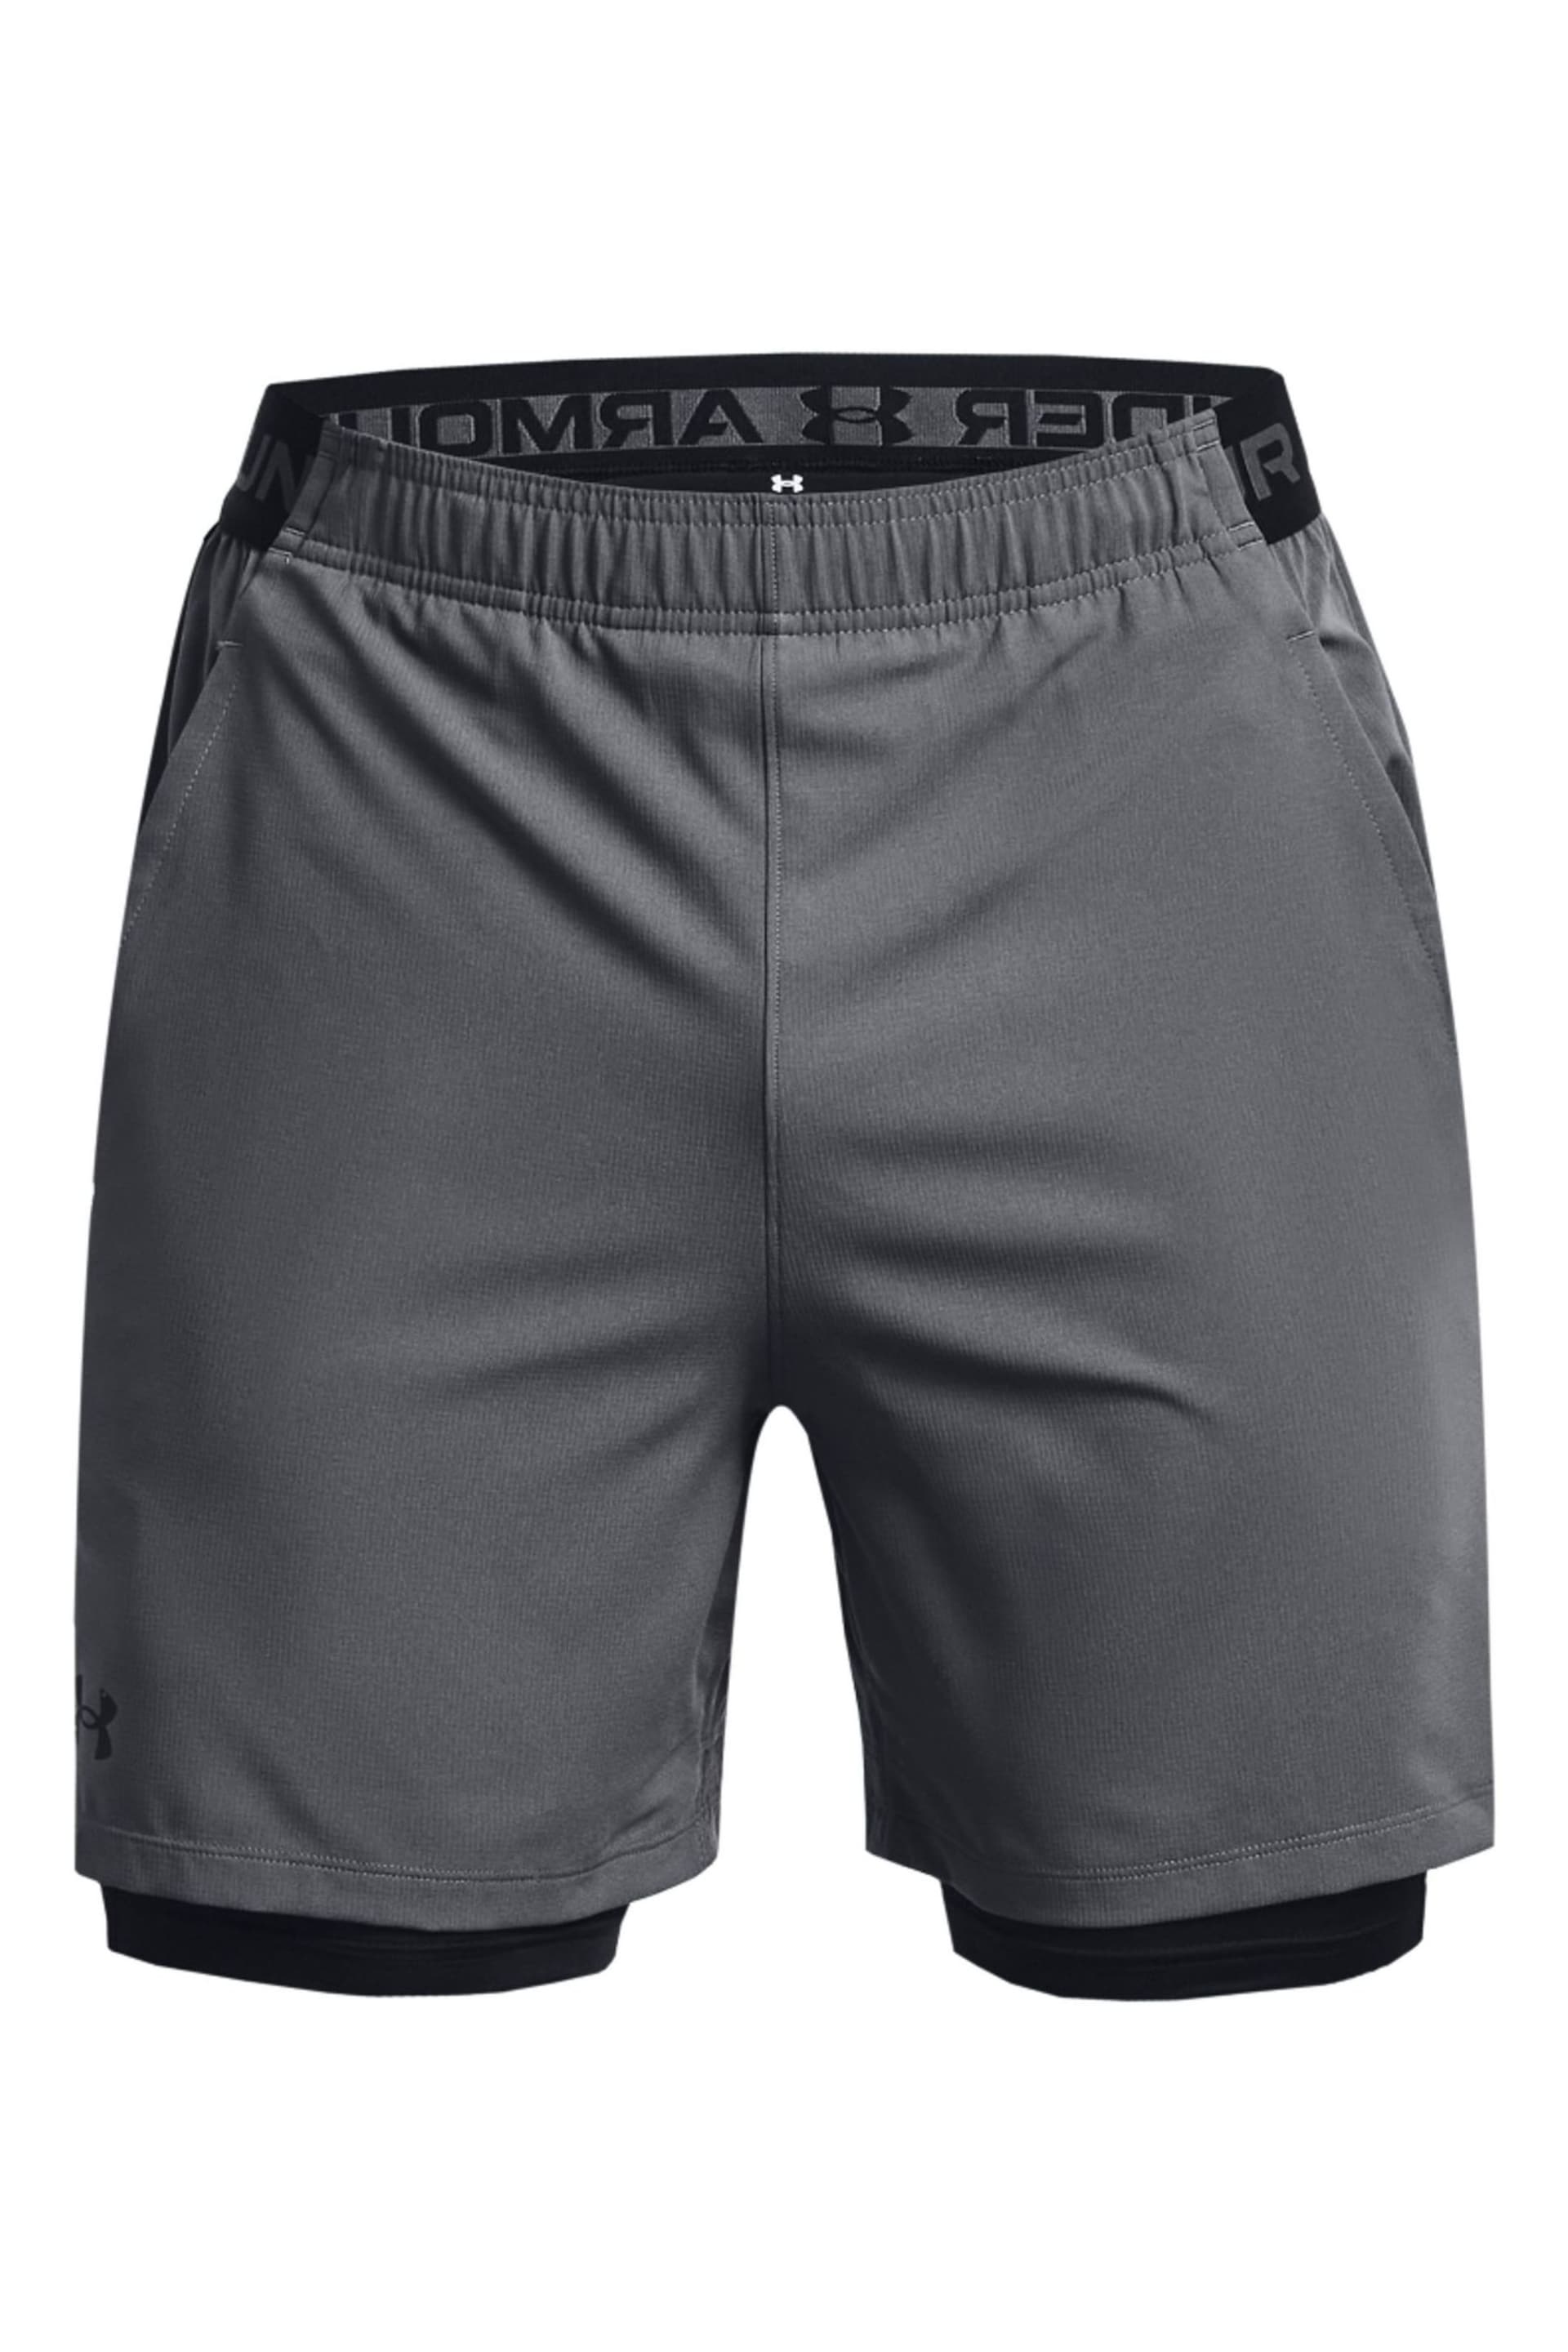 Under Armour Grey Vanish Woven 2-In-1 Shorts - Image 5 of 7